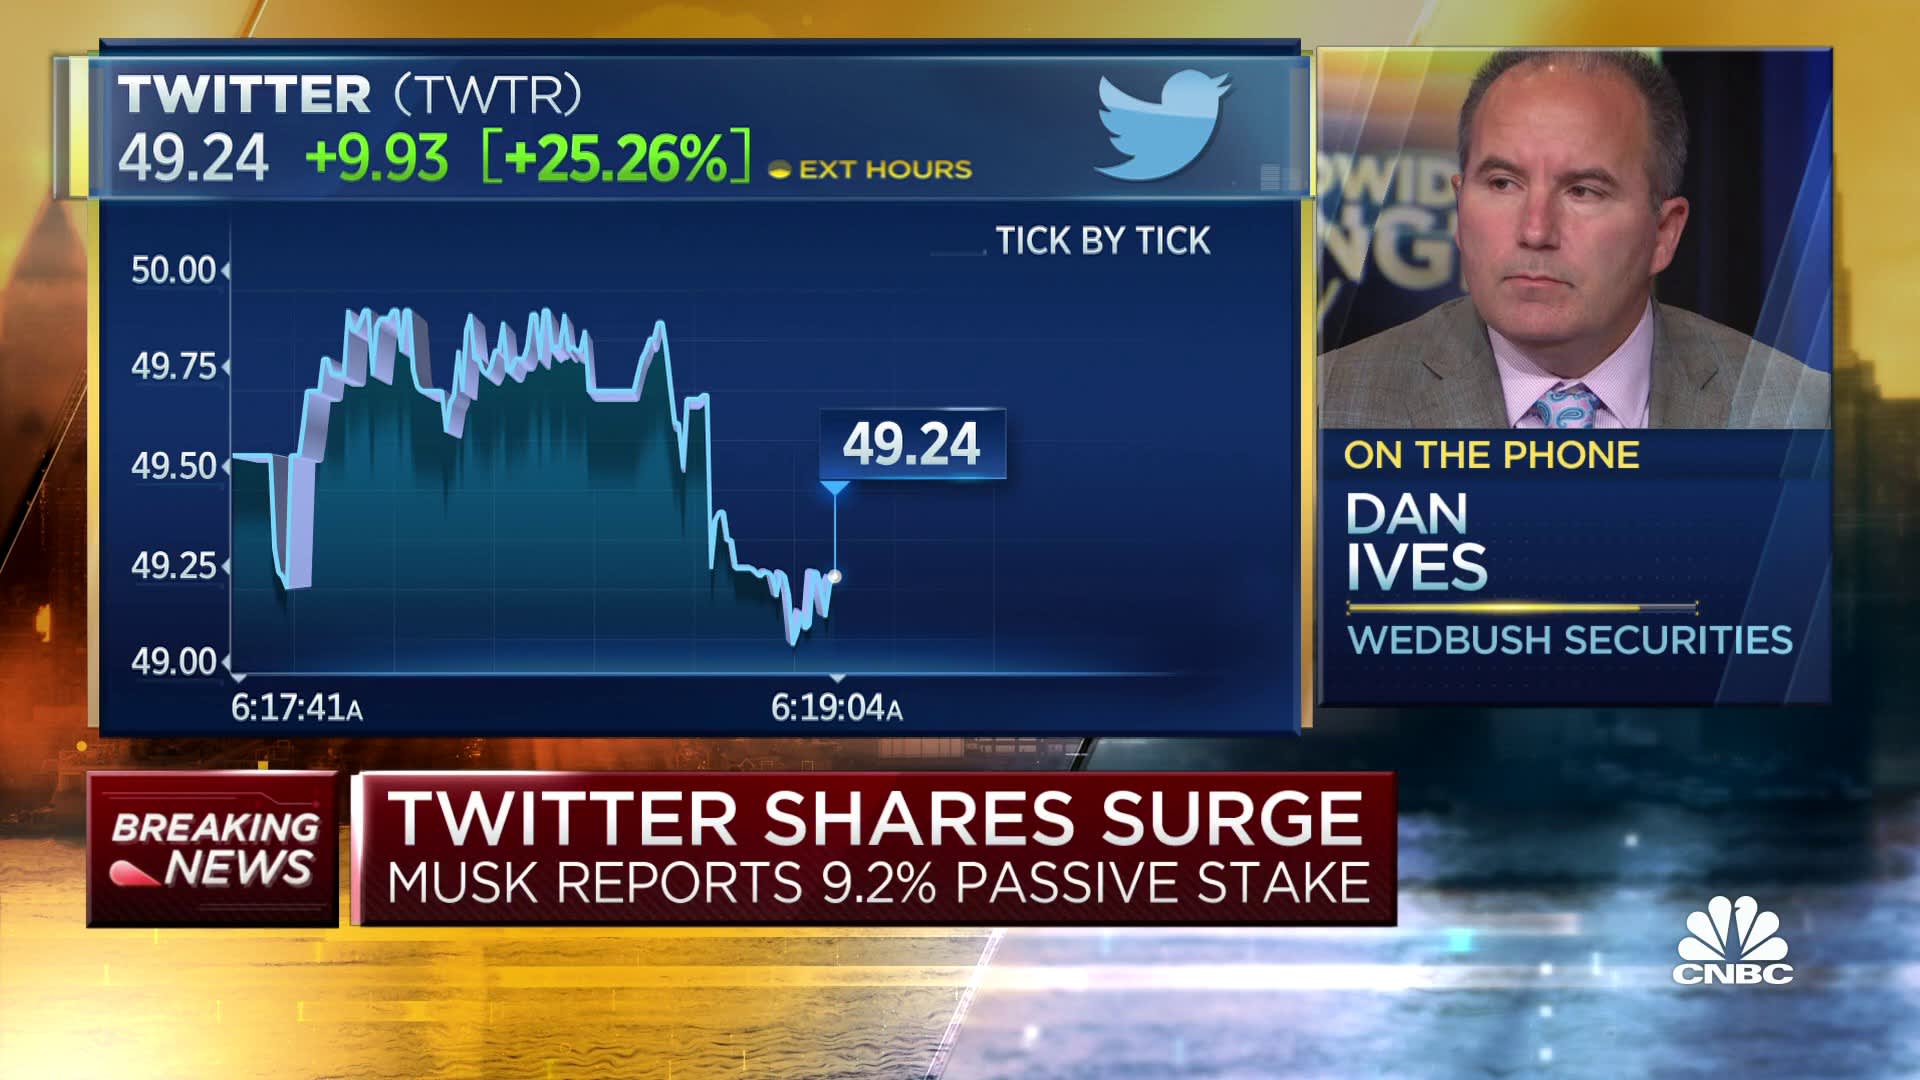 Twitter shares surge after Elon Musk takes 9.2% stake in company